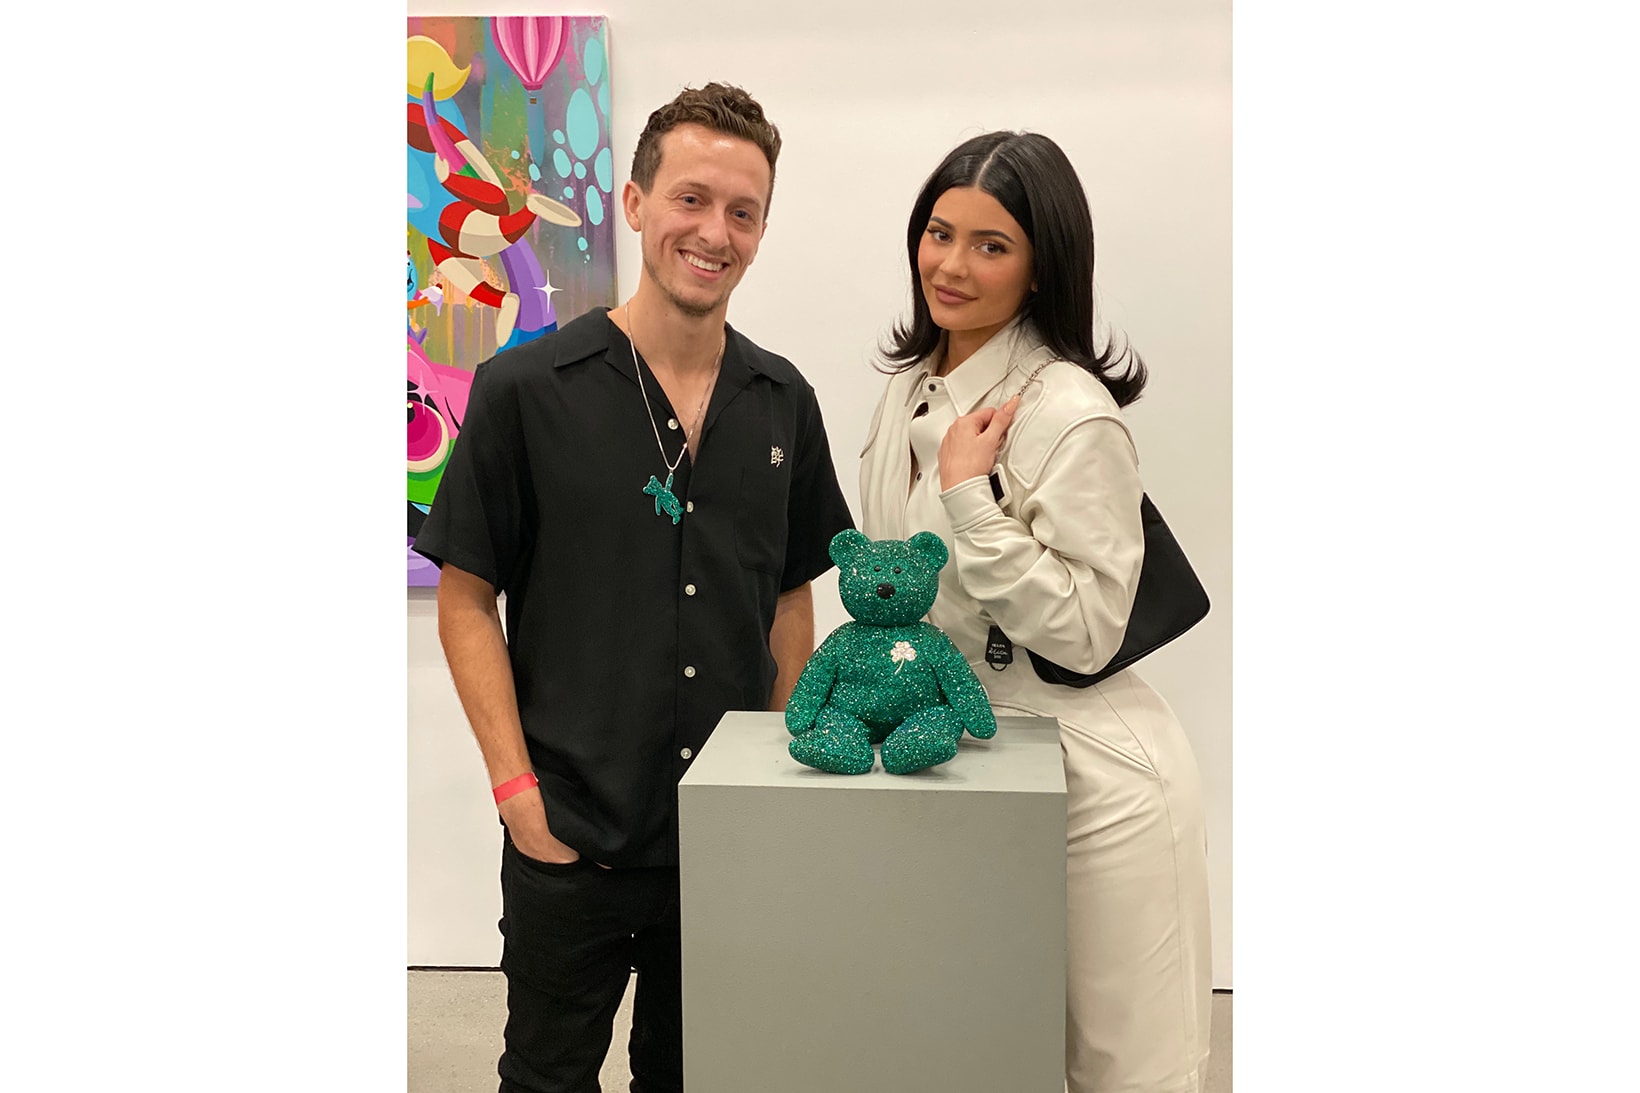 justin hailey bieber online auction charity beanie baby dan life art green crystals kylie jenner